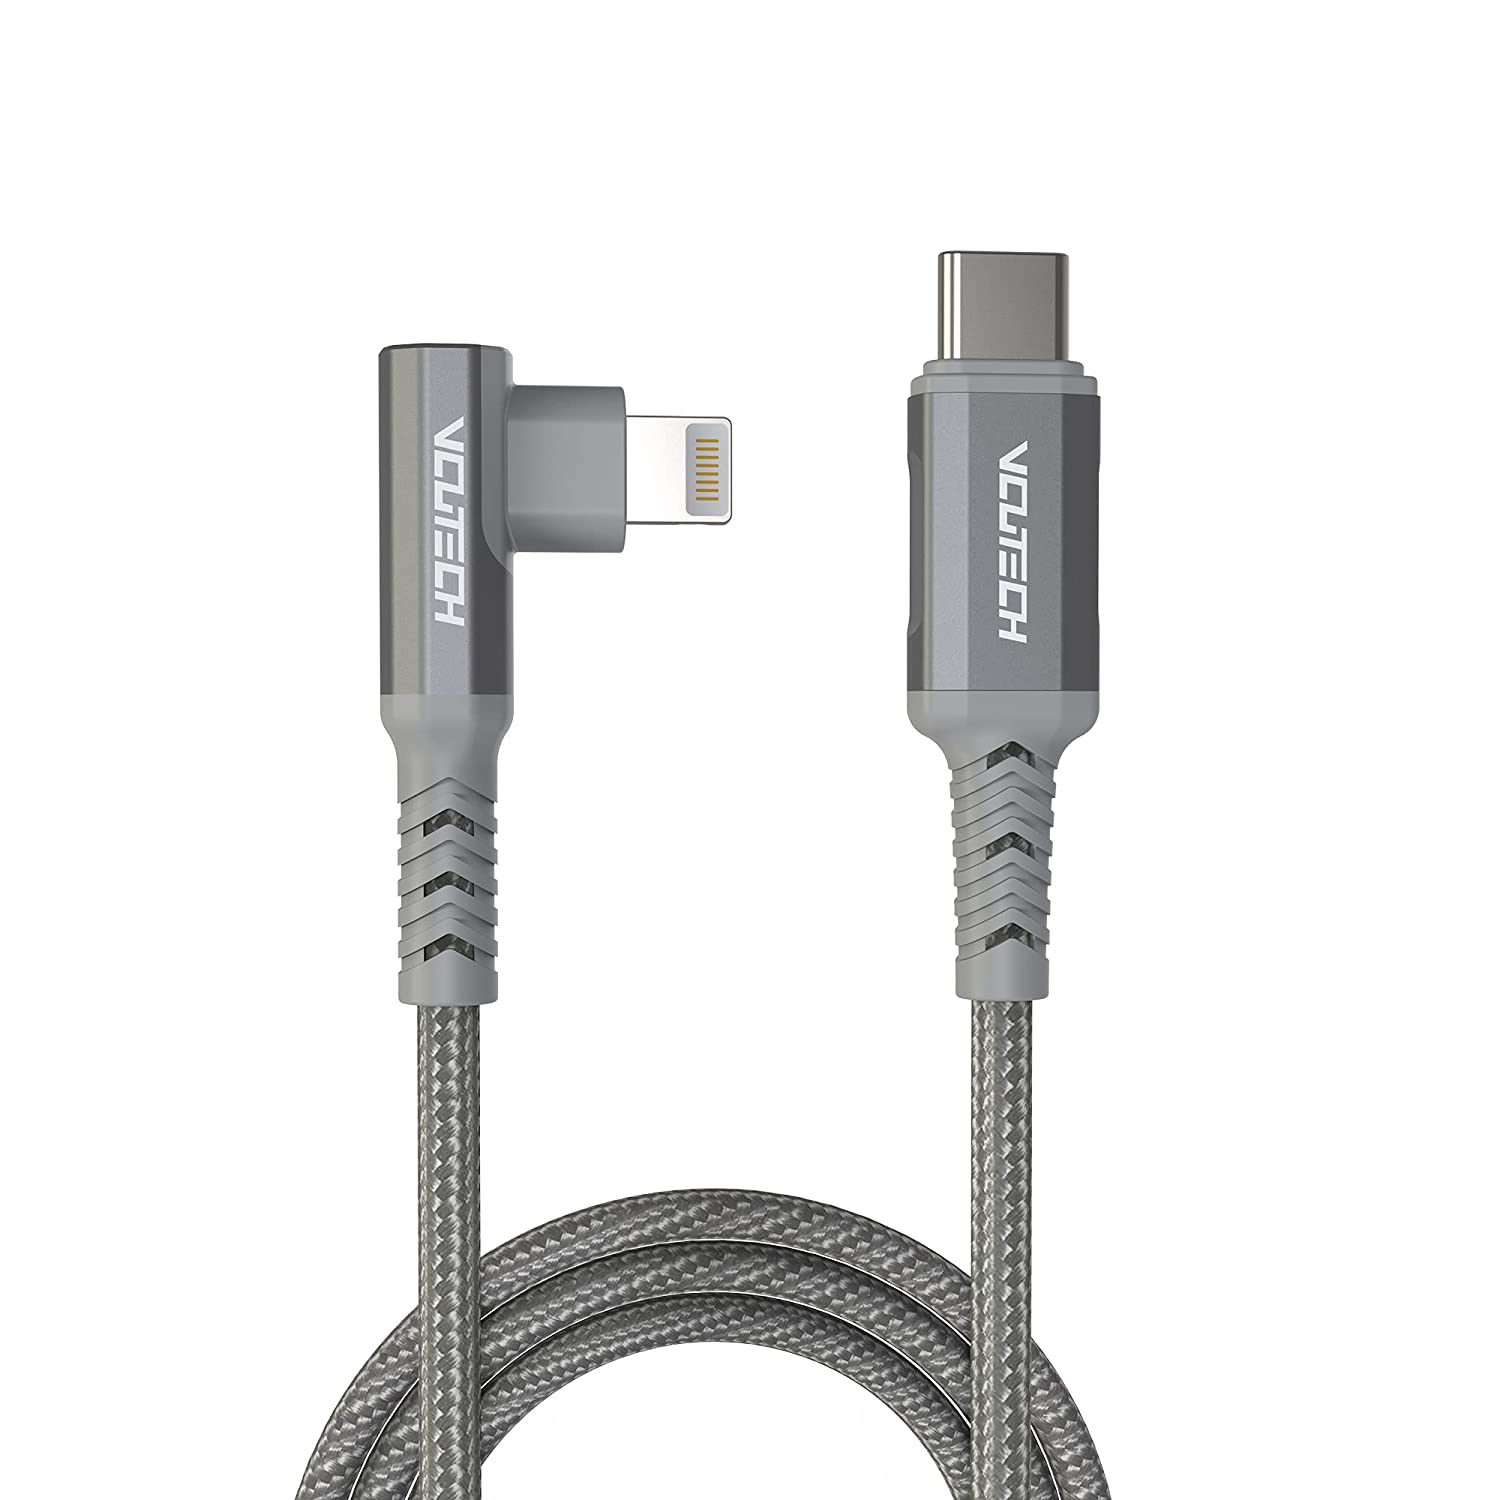 VCUTECH Lightning to USB-C 1.1 ft/35 cm MFI Certified for DJI Mini 2/Air 2S/Mavic Air 2/Mavic 3 Remote Controller OTG Extension Cable Cord Accessories, 90 Degree Fast Charging/Syncing.